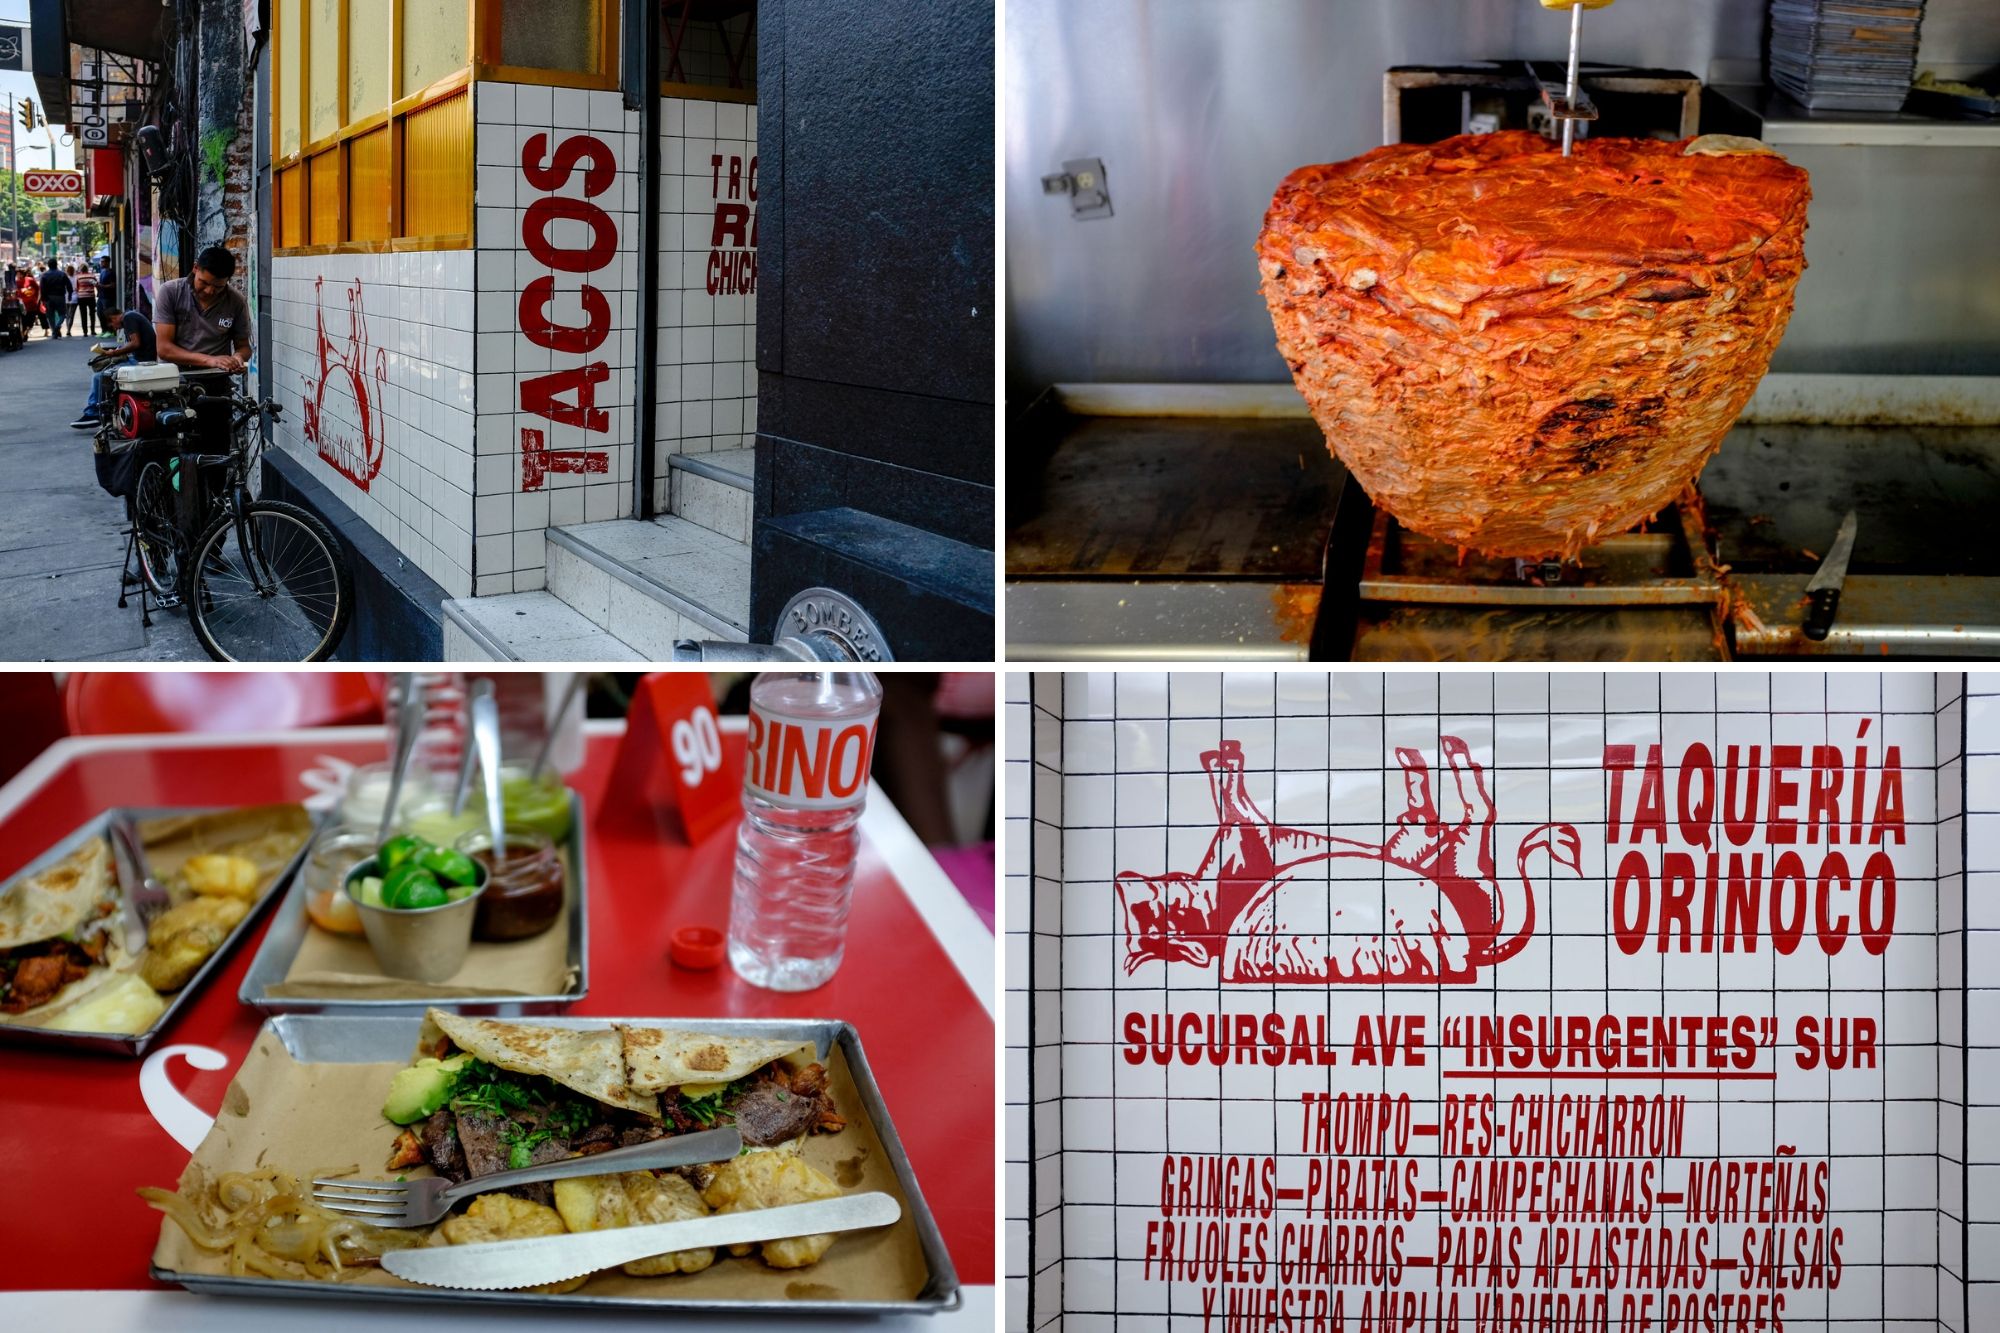 Collage: man sharpening knives on a bike outside of the restaurant; meat on a vertical spit, our meals of tacos, and a sign within a restaurant that has a drawing of a cow upside down in a taco